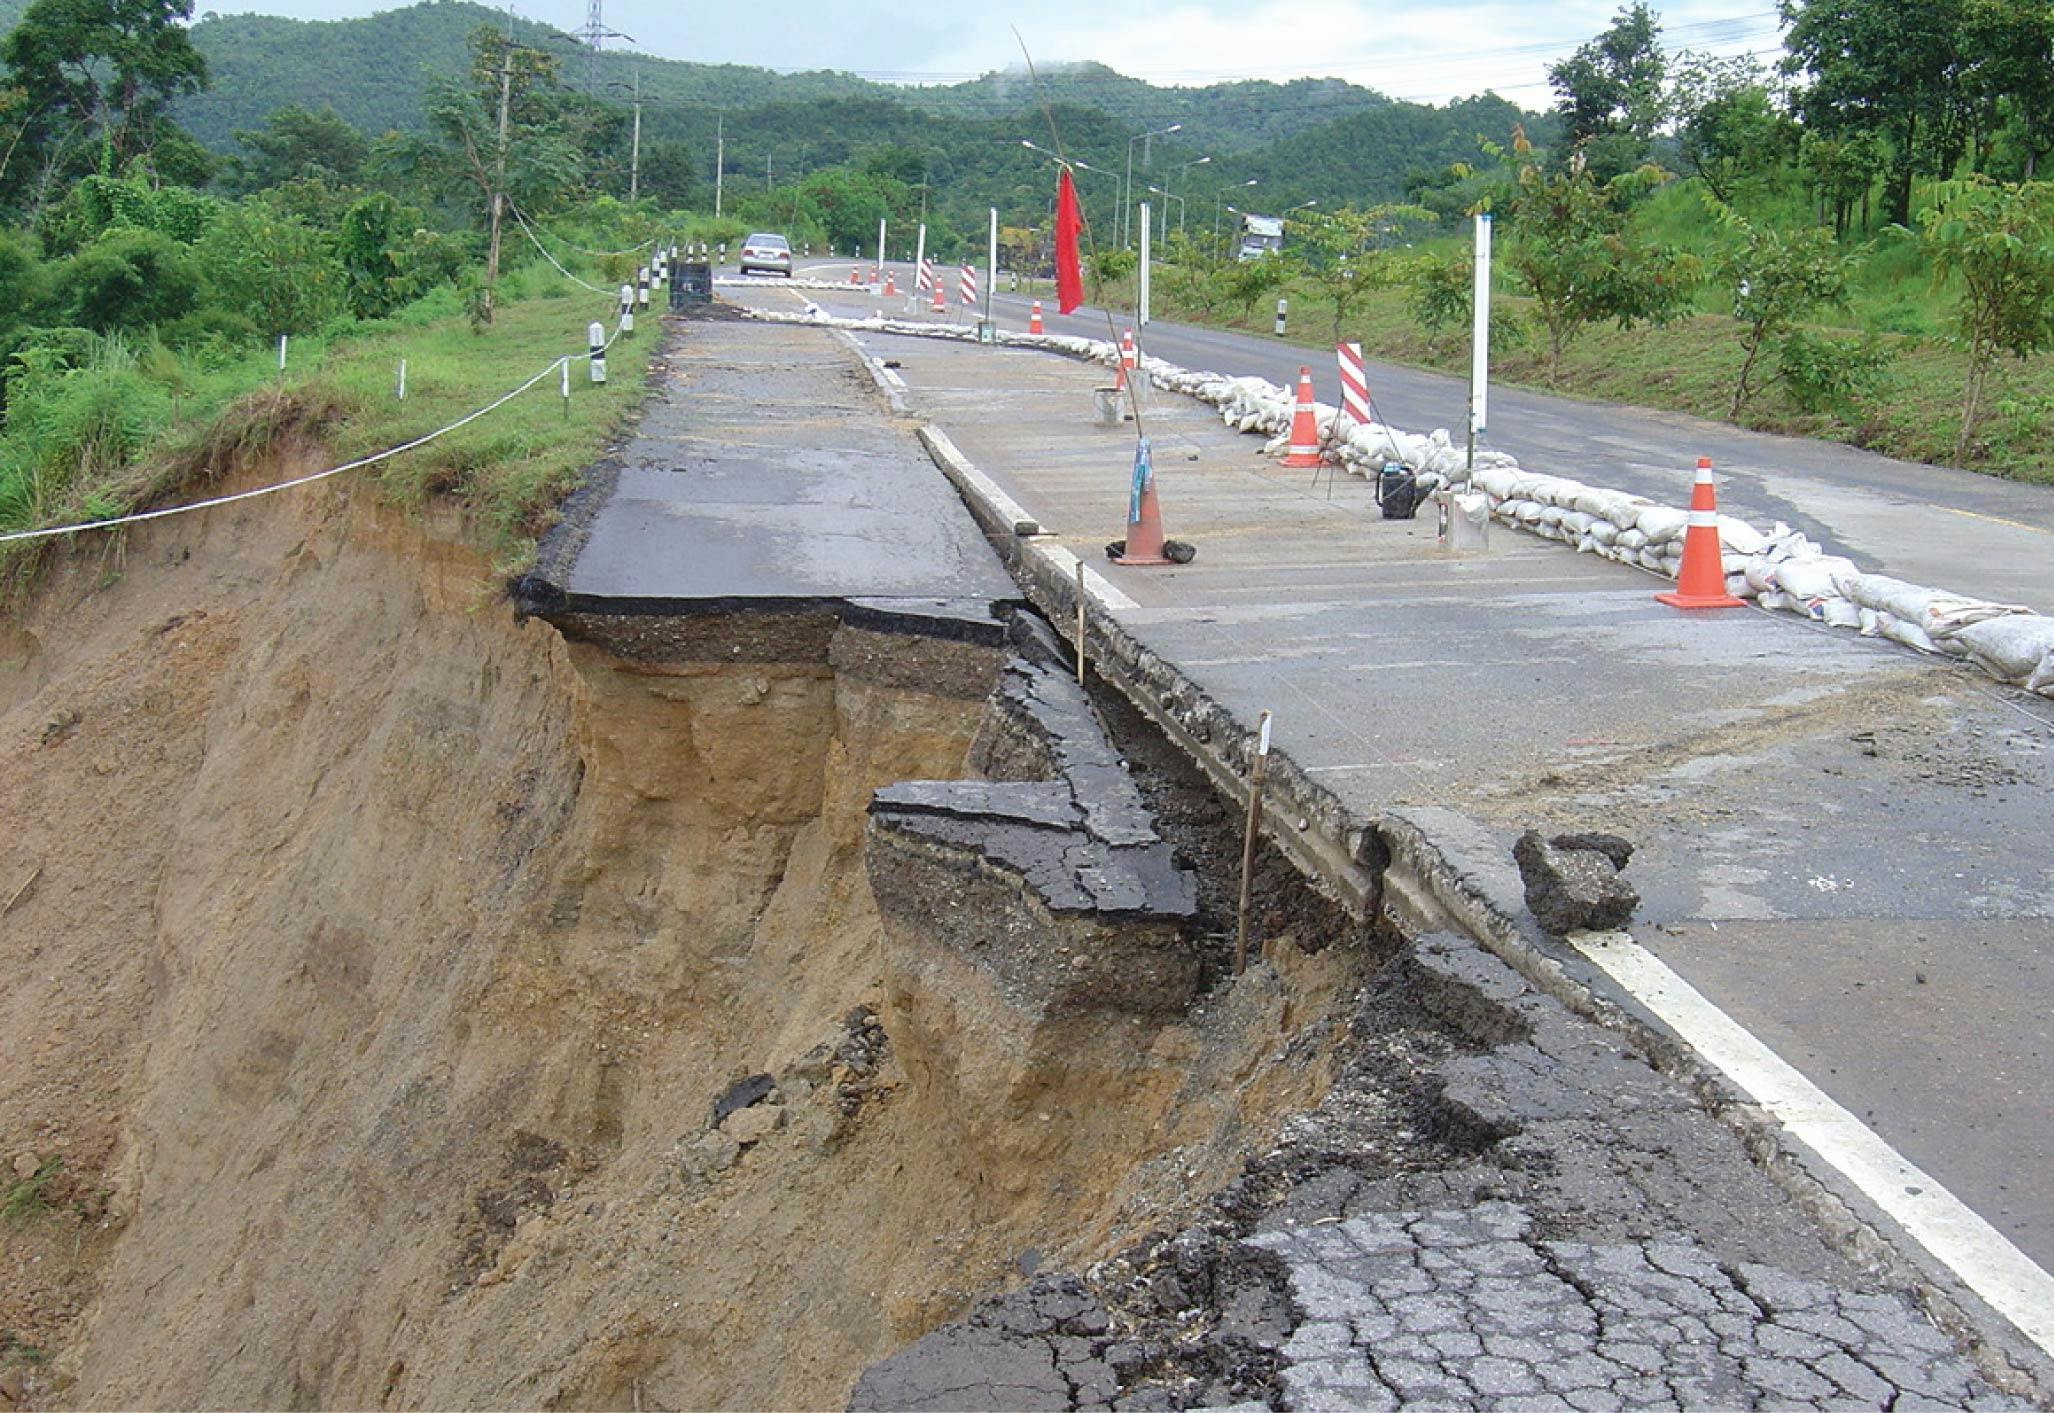 The road connecting Khun Tan and Lampoon in Northern Thailand is vital for their economic link. Unfortunately, the embankment at KM 11 failed, causing significant traffic disruptions and posing risks to road users.